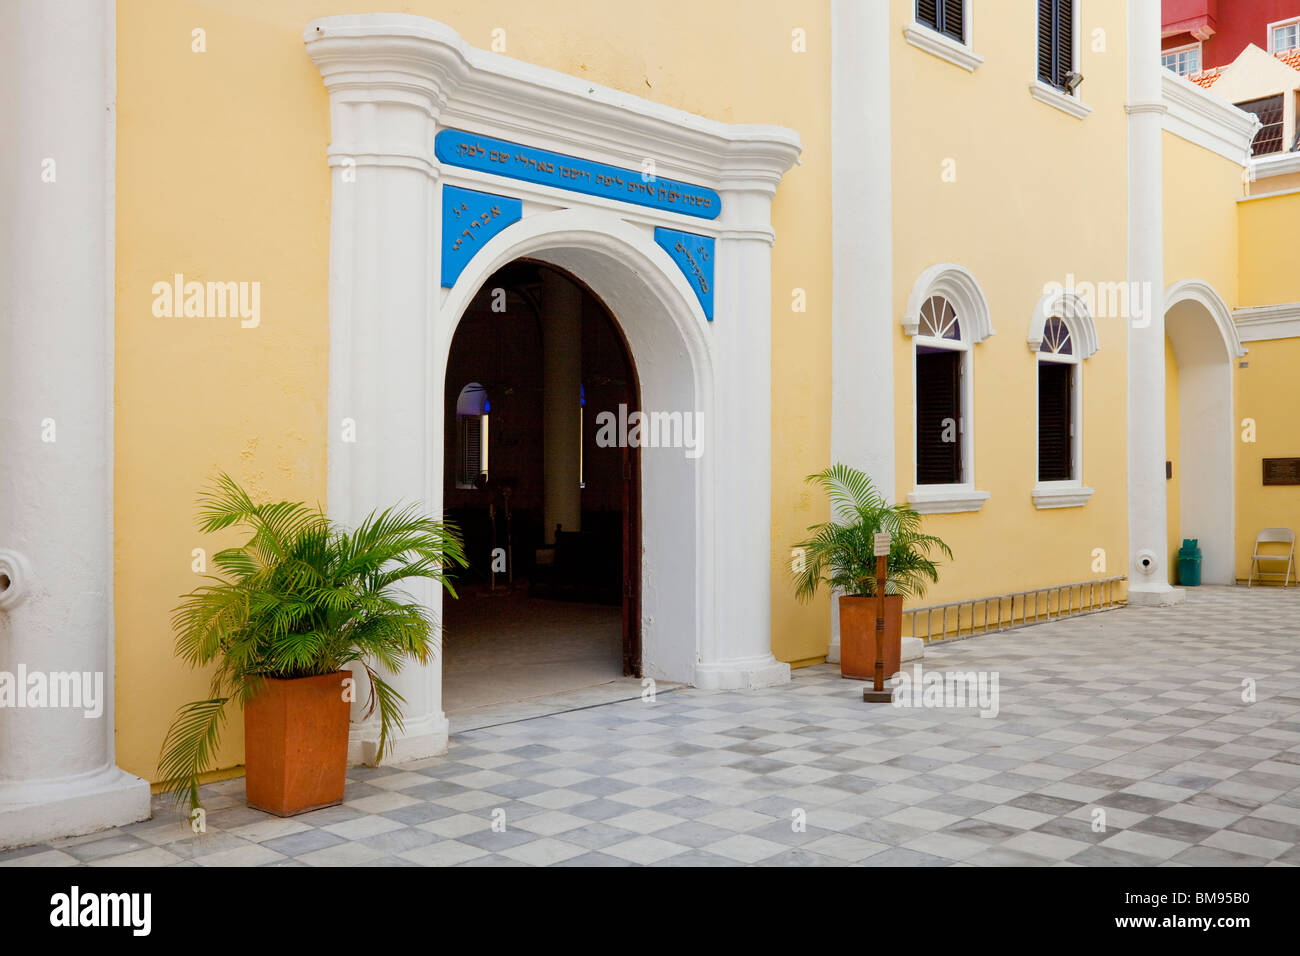 The courtyard entrance to the Jewish Synagogue in Curacao, Netherland Antilles. Stock Photo